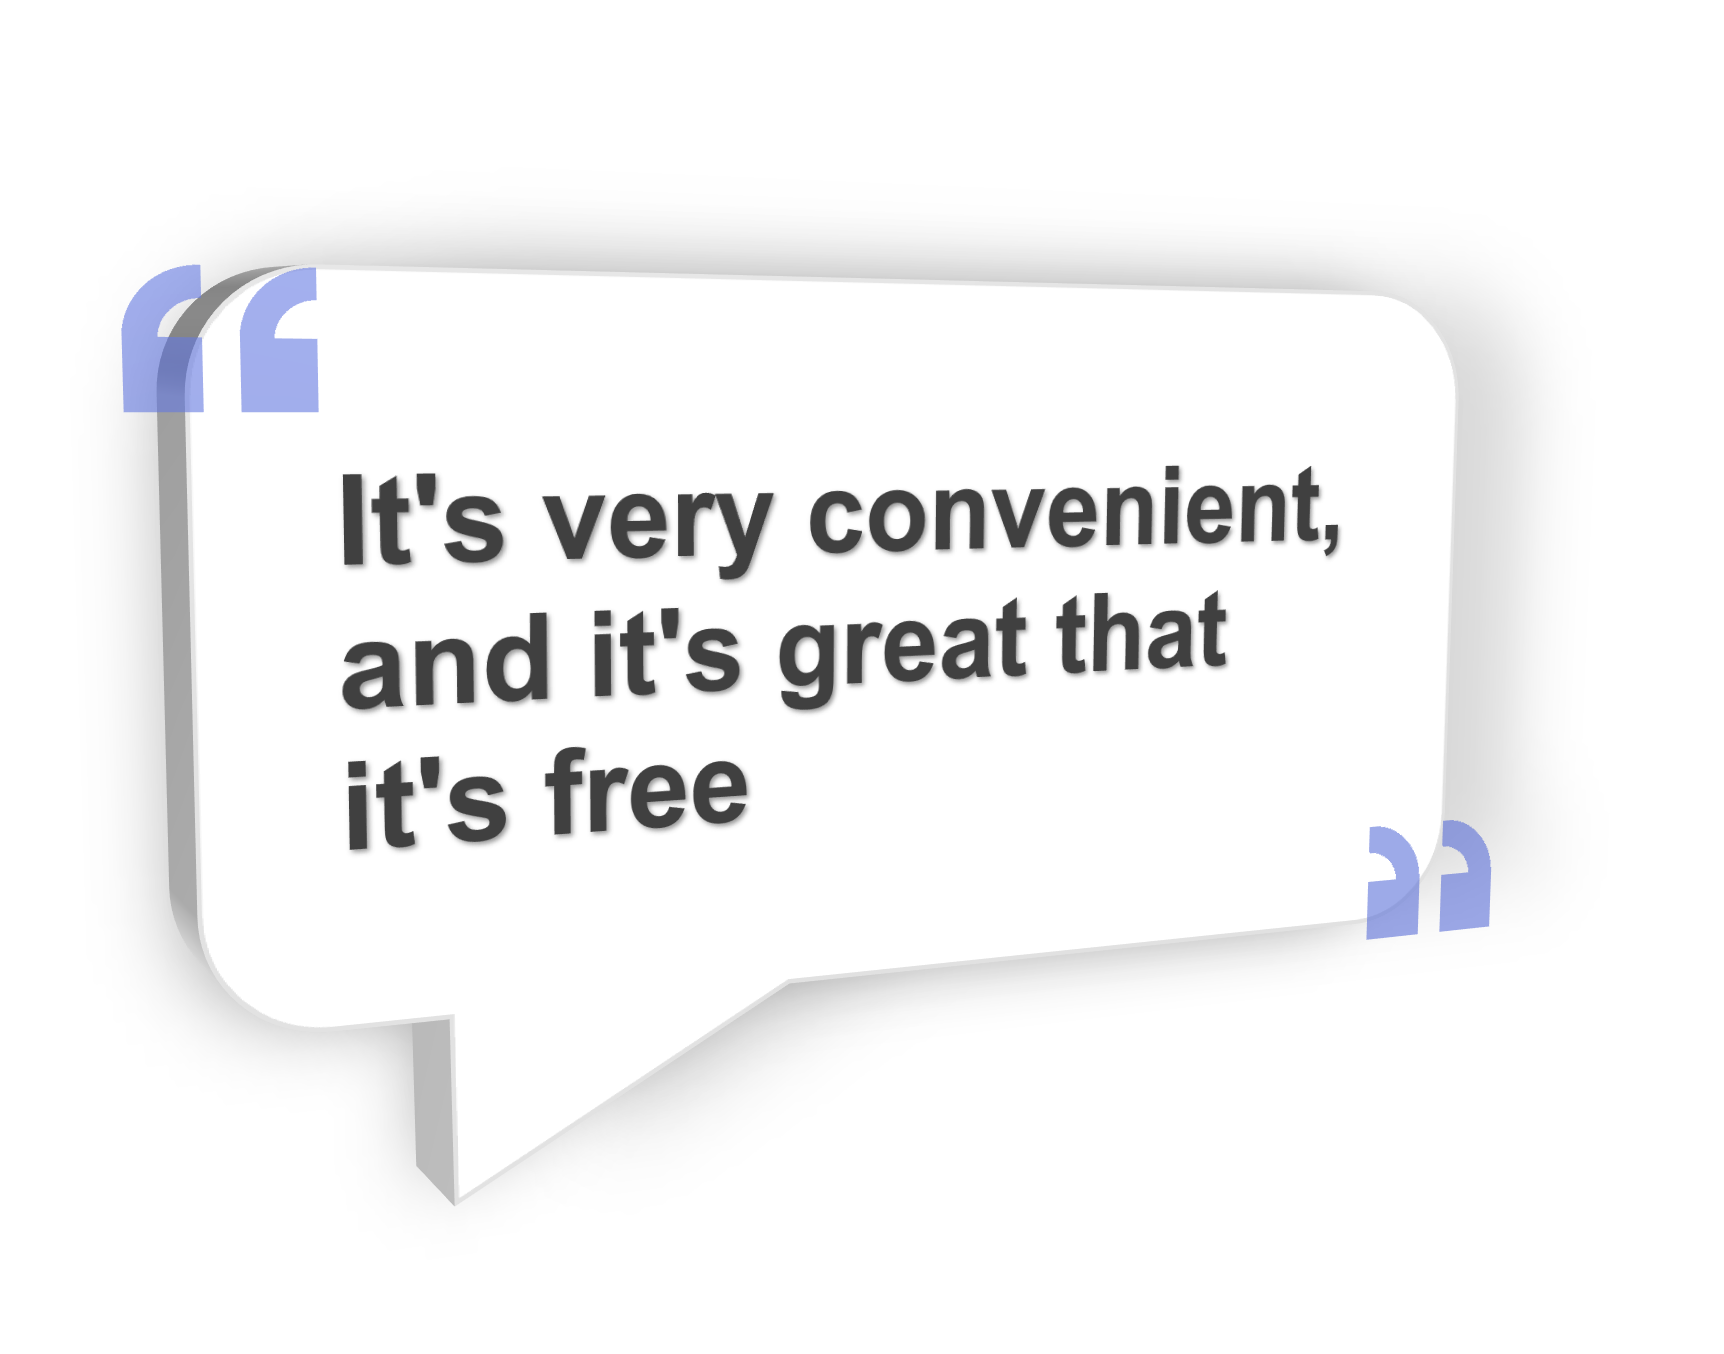 User testimonial 3 quotation bubble: 'It's very convenient, and it's great that it's free'